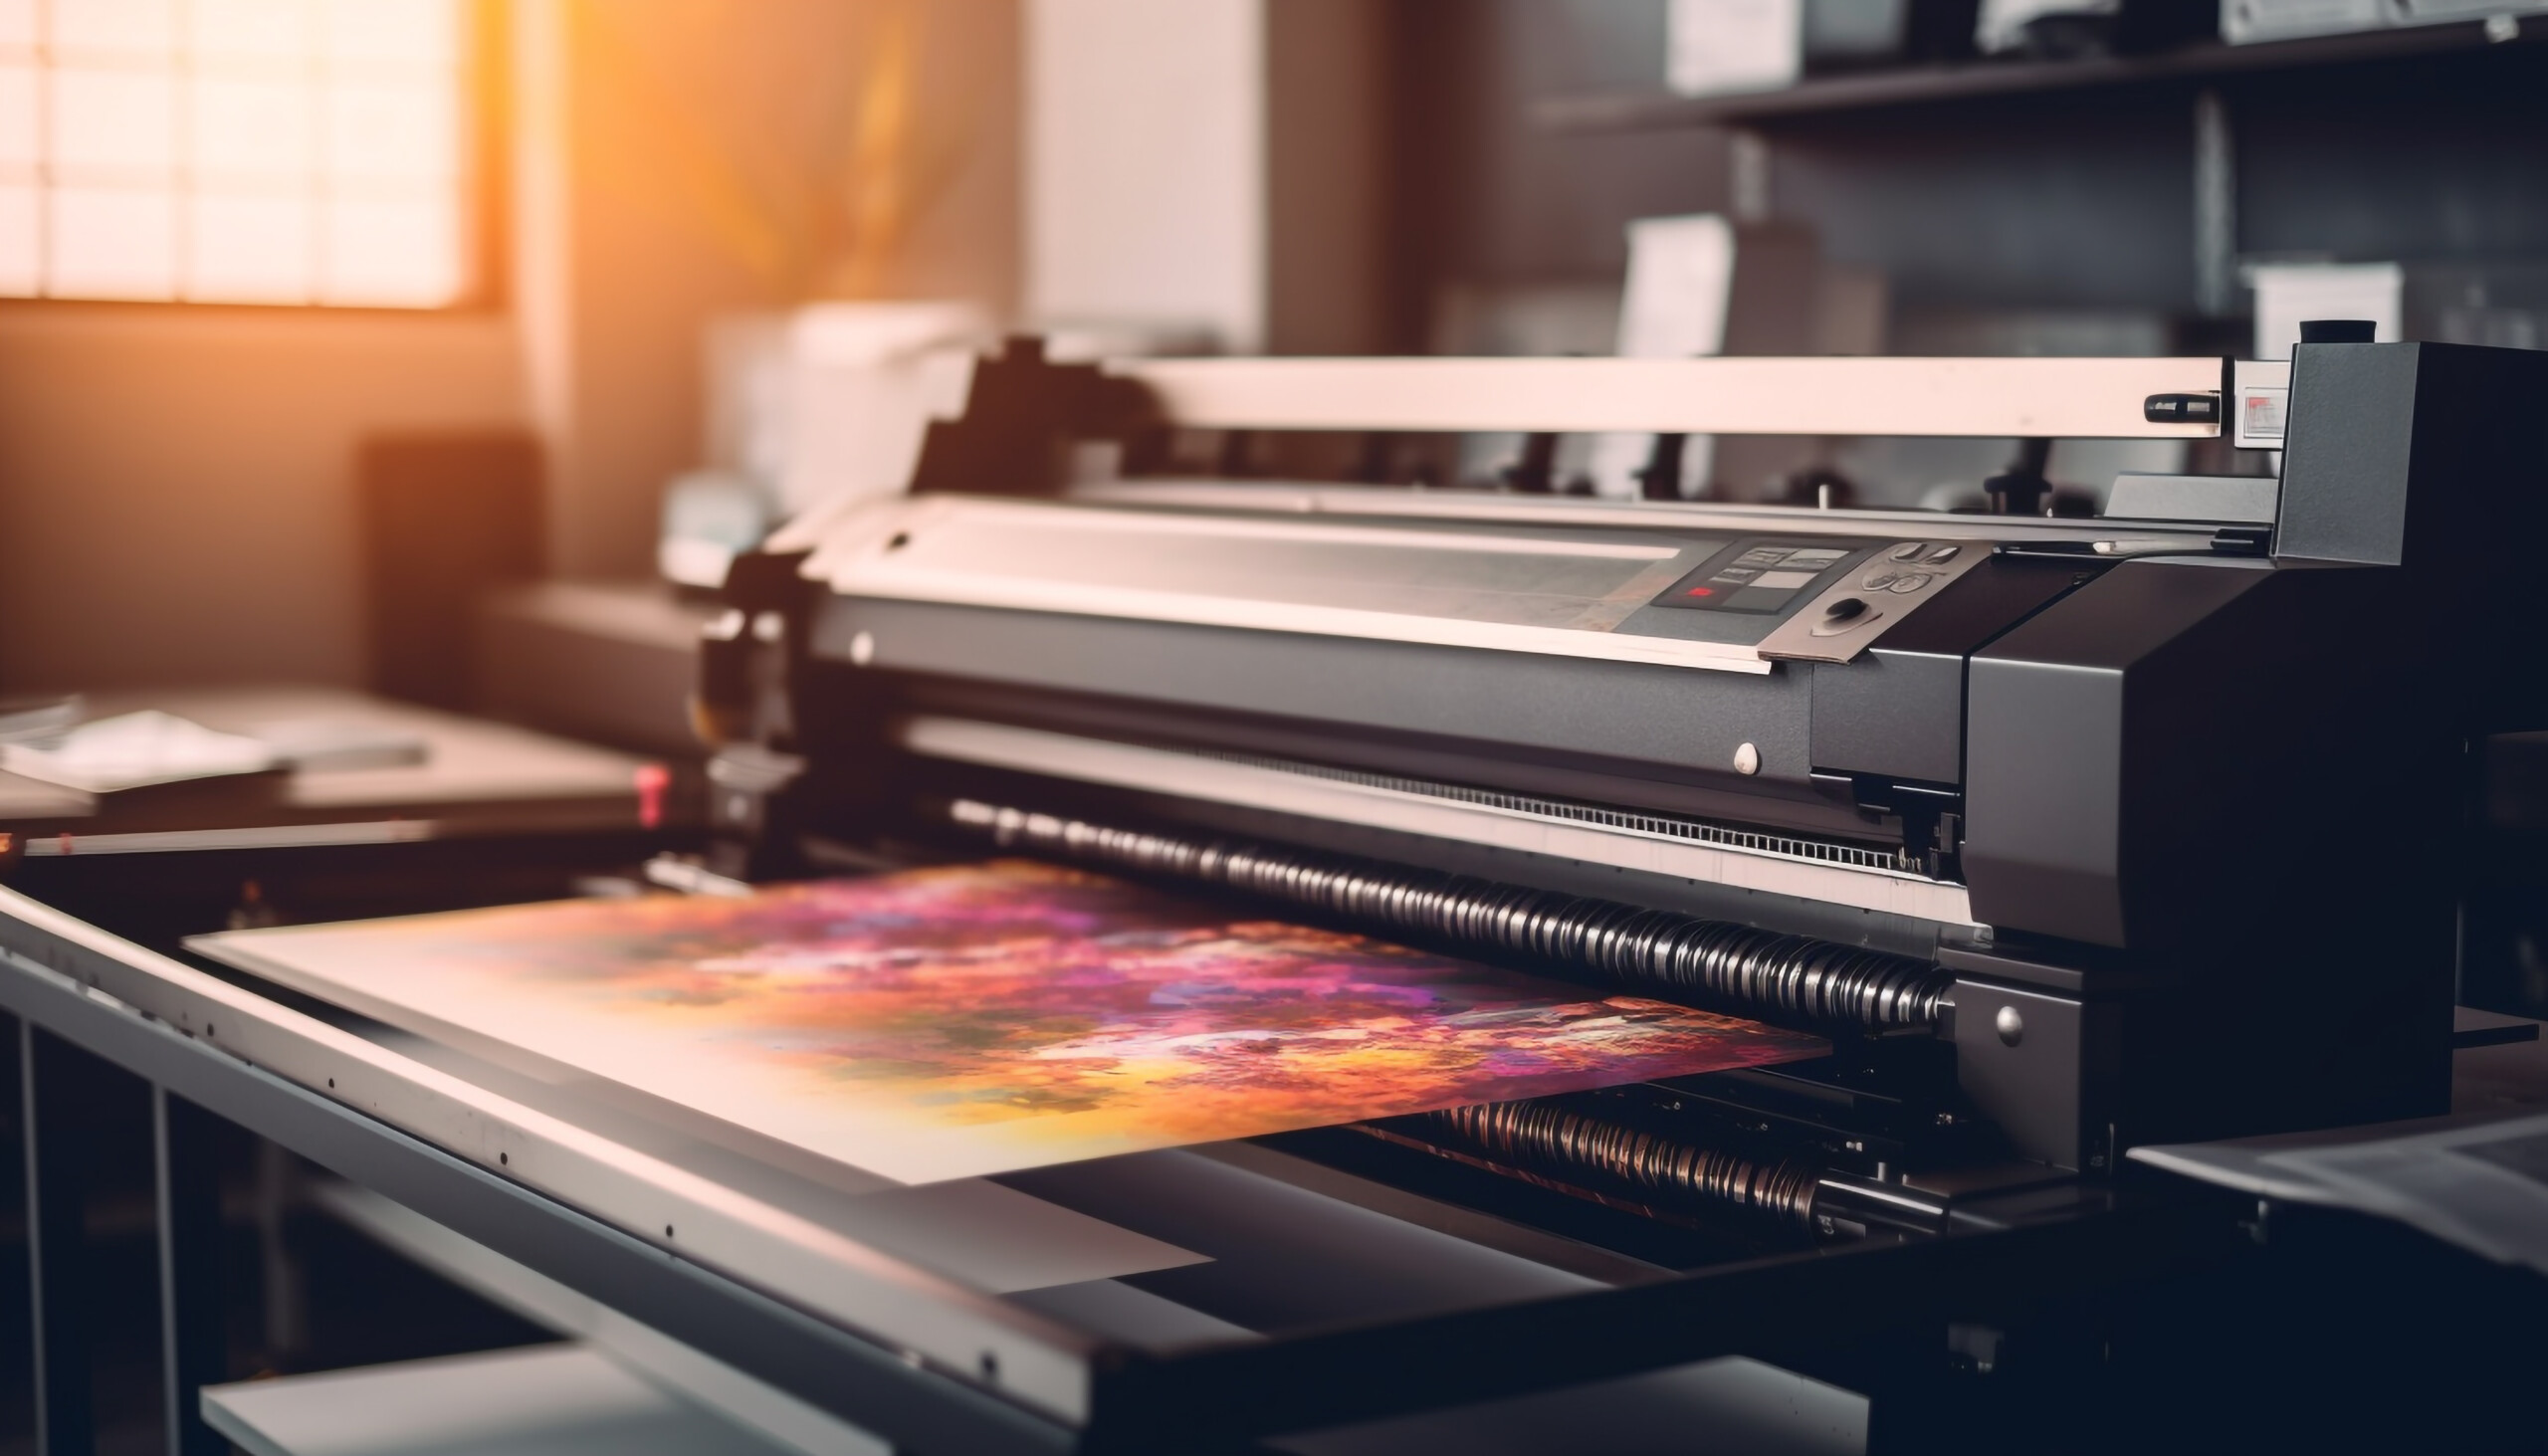 Get all your Business Printing needs filled with Experienced Service from Streamline Print and Design.